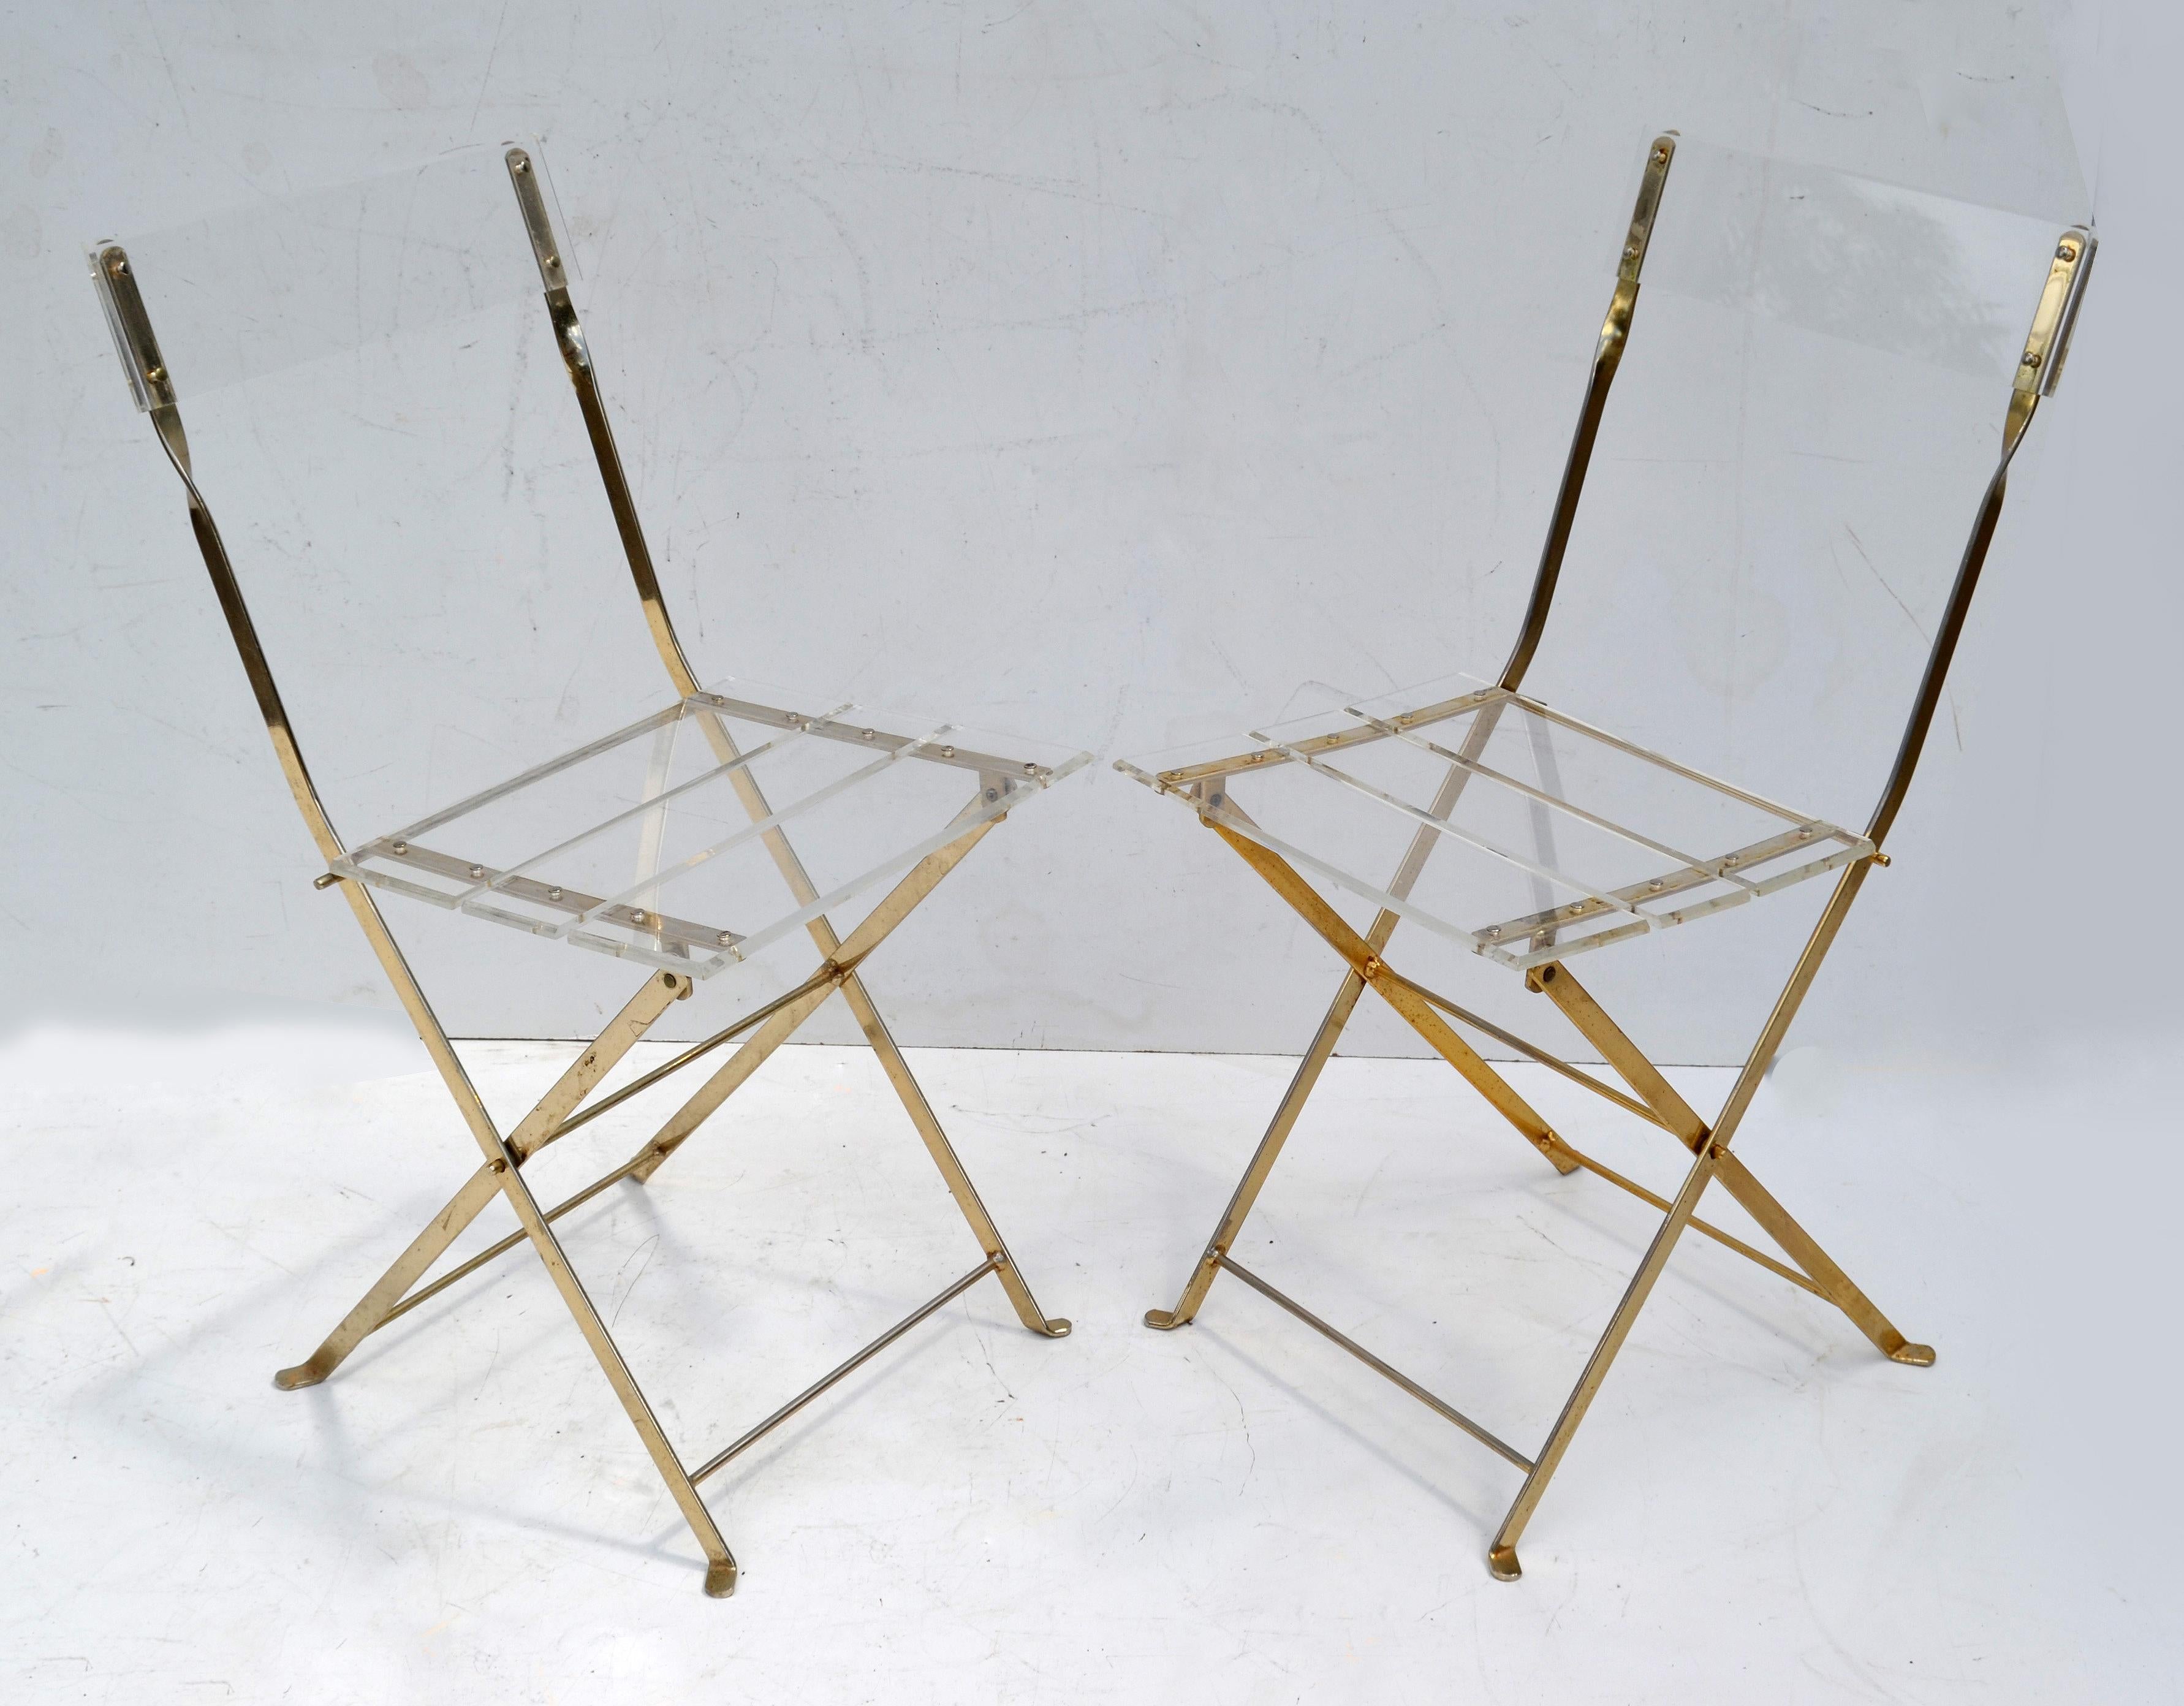 Steel Set of 10 Lucite Folding Chairs by Yonel Lebovici for Marais International 1970